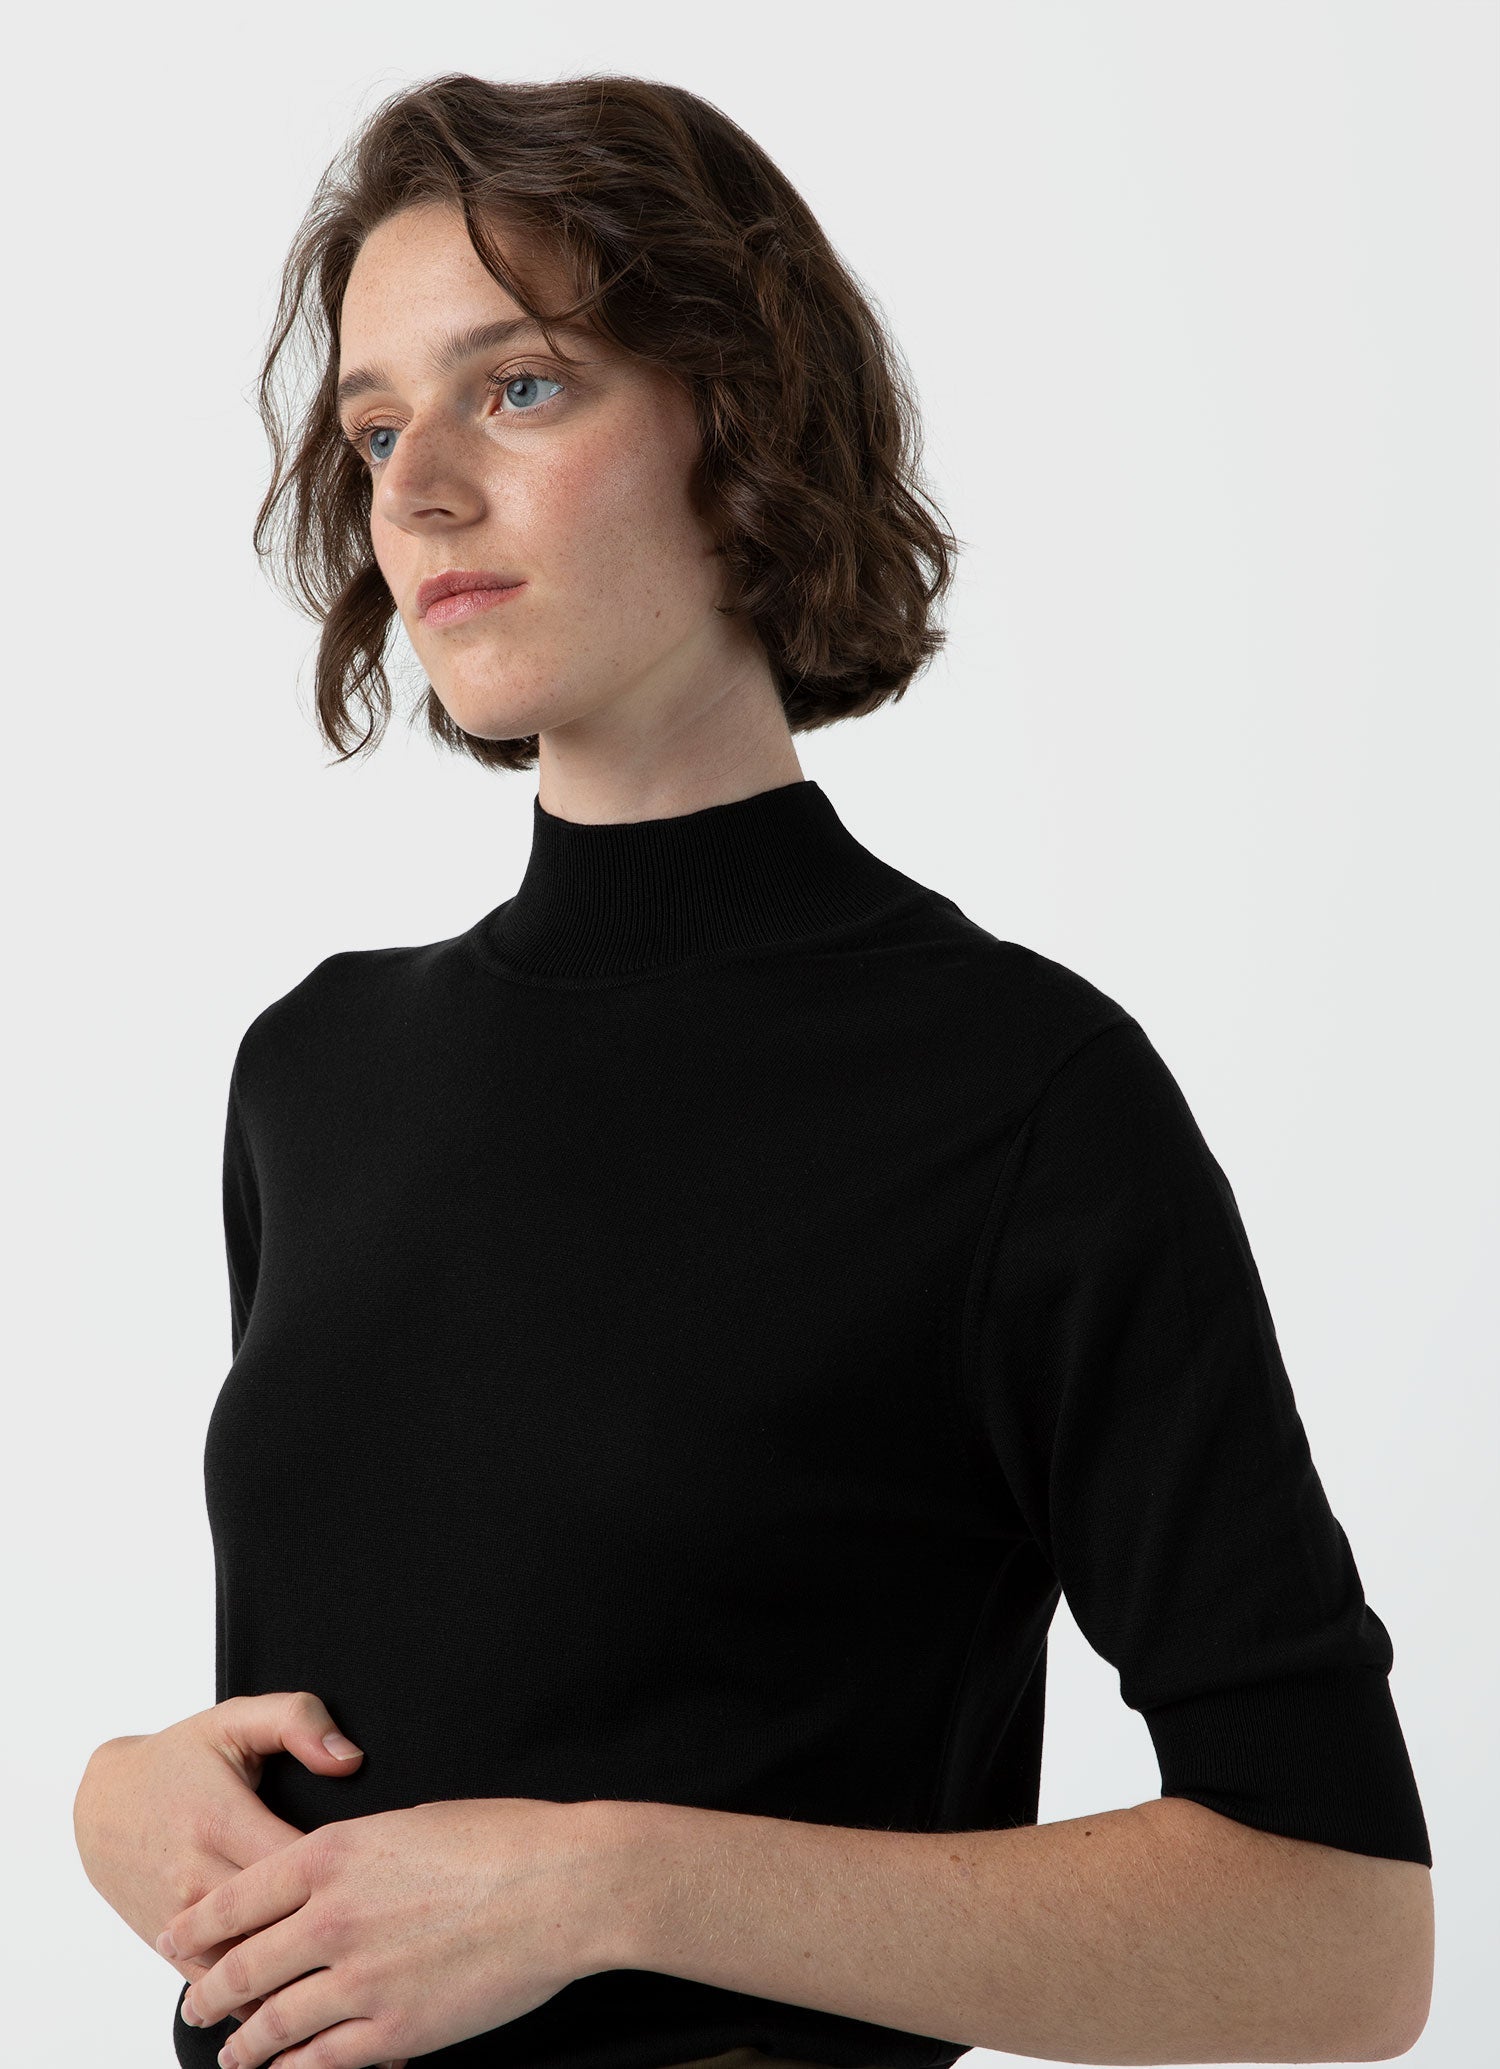 Fashionable Turtle Neck Sweater Outfit for Women